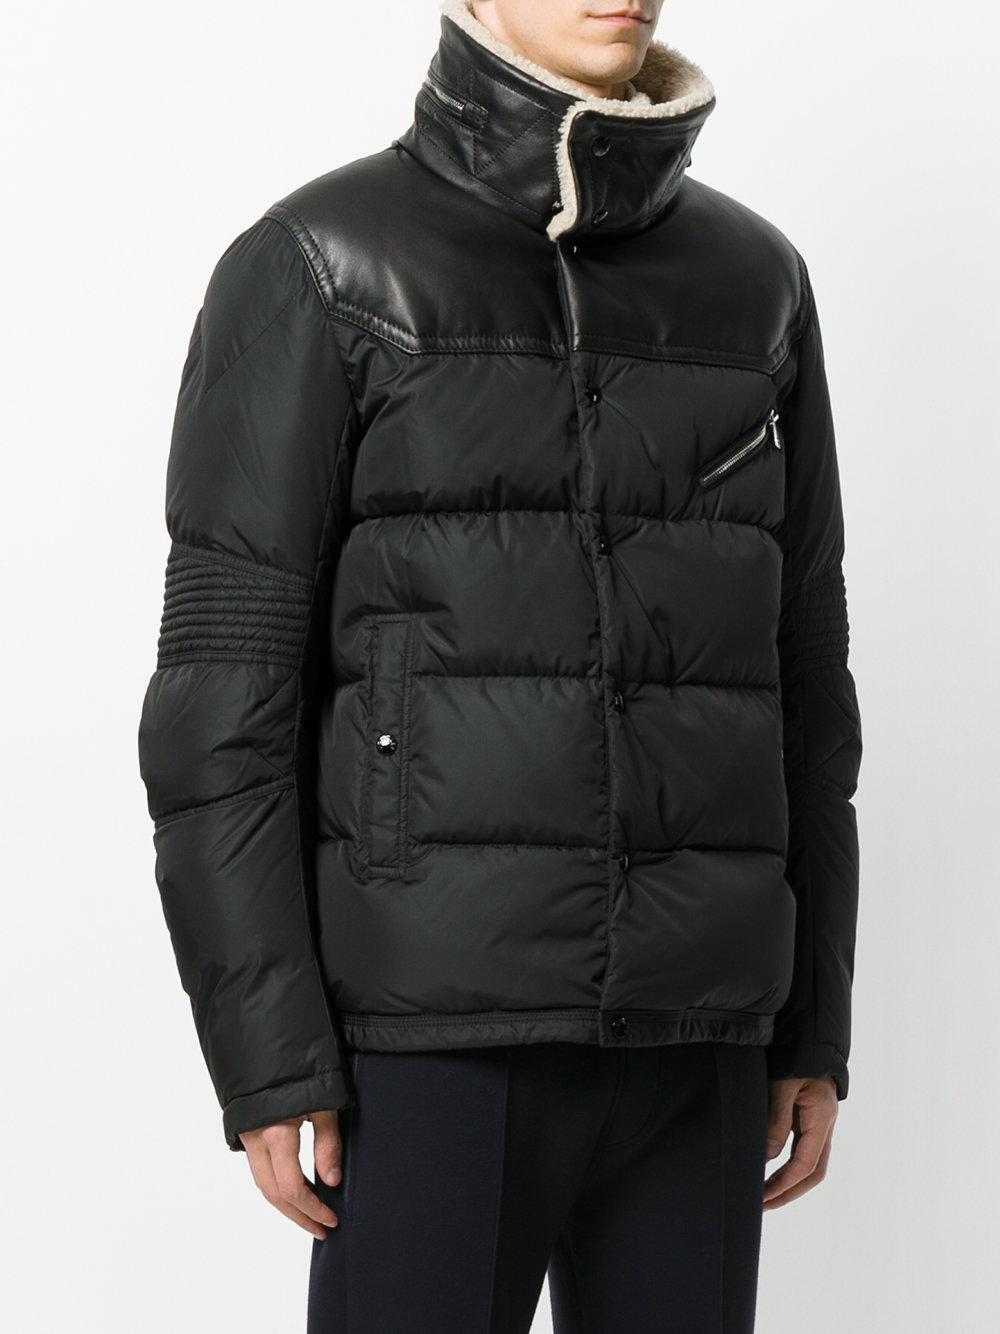 Moncler Leather Tancrede Jacket in 